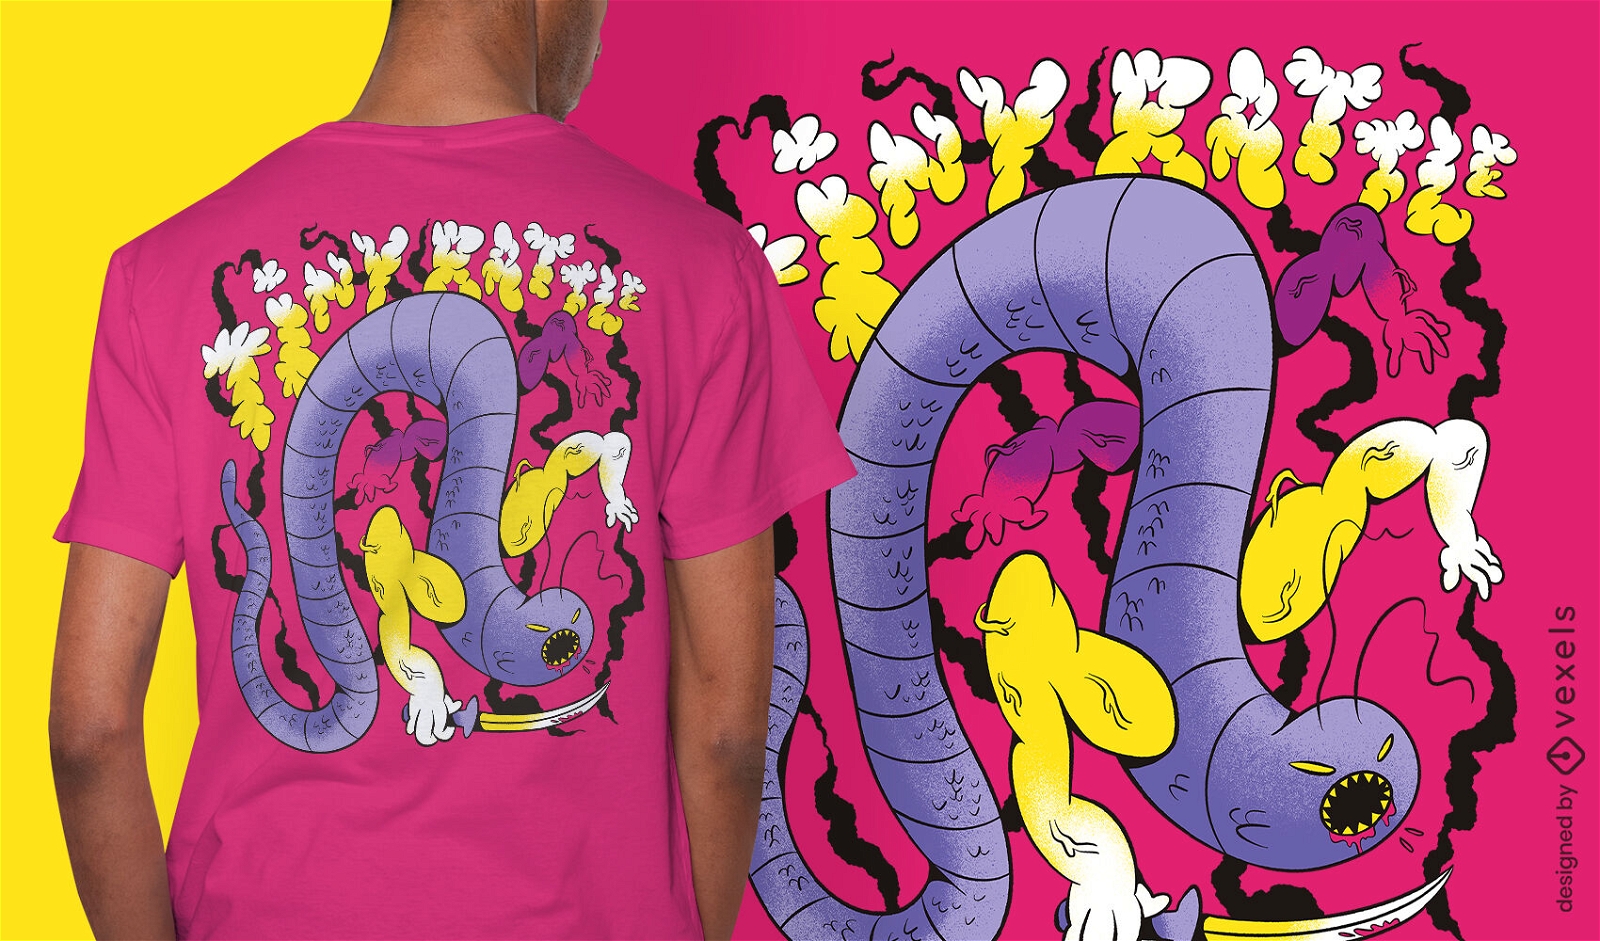 Scary worm insect warrior t-shirt psd